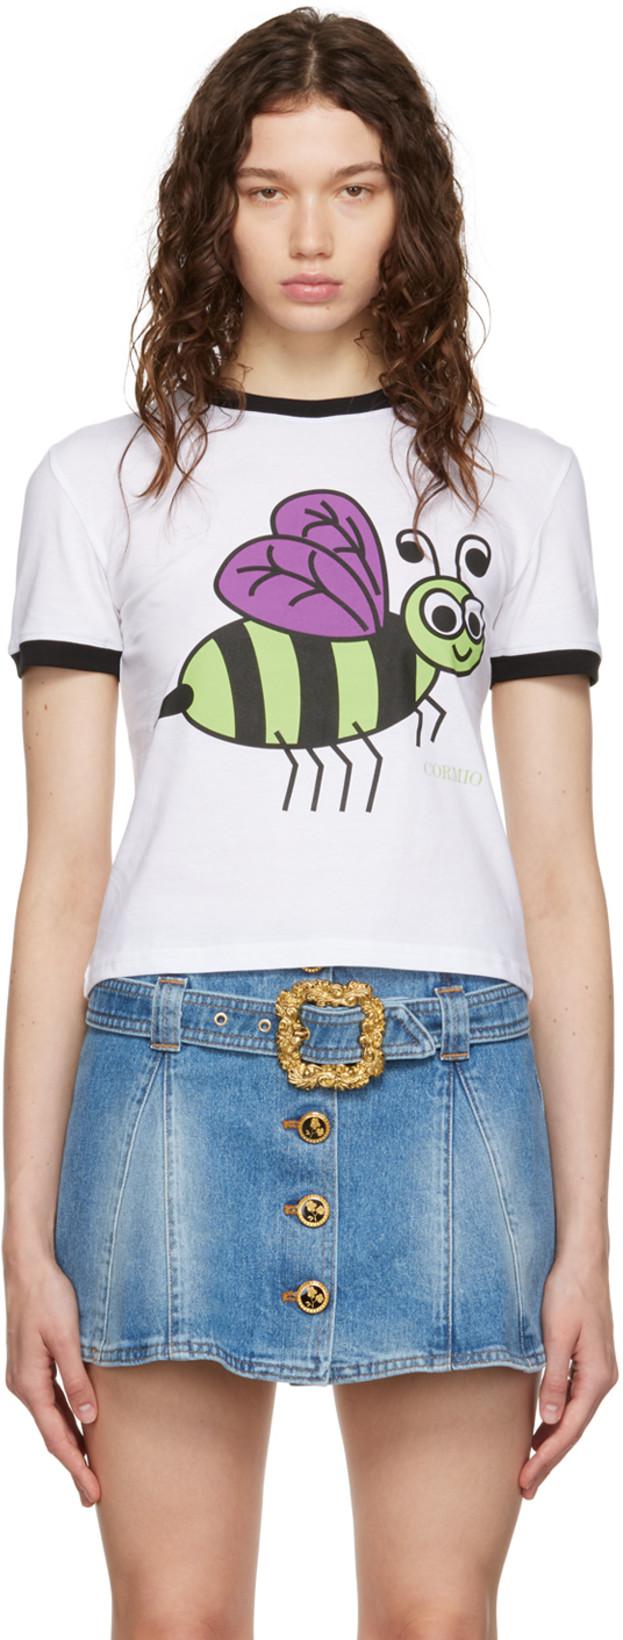 White 'Busy As A Bee' T-Shirt by CORMIO